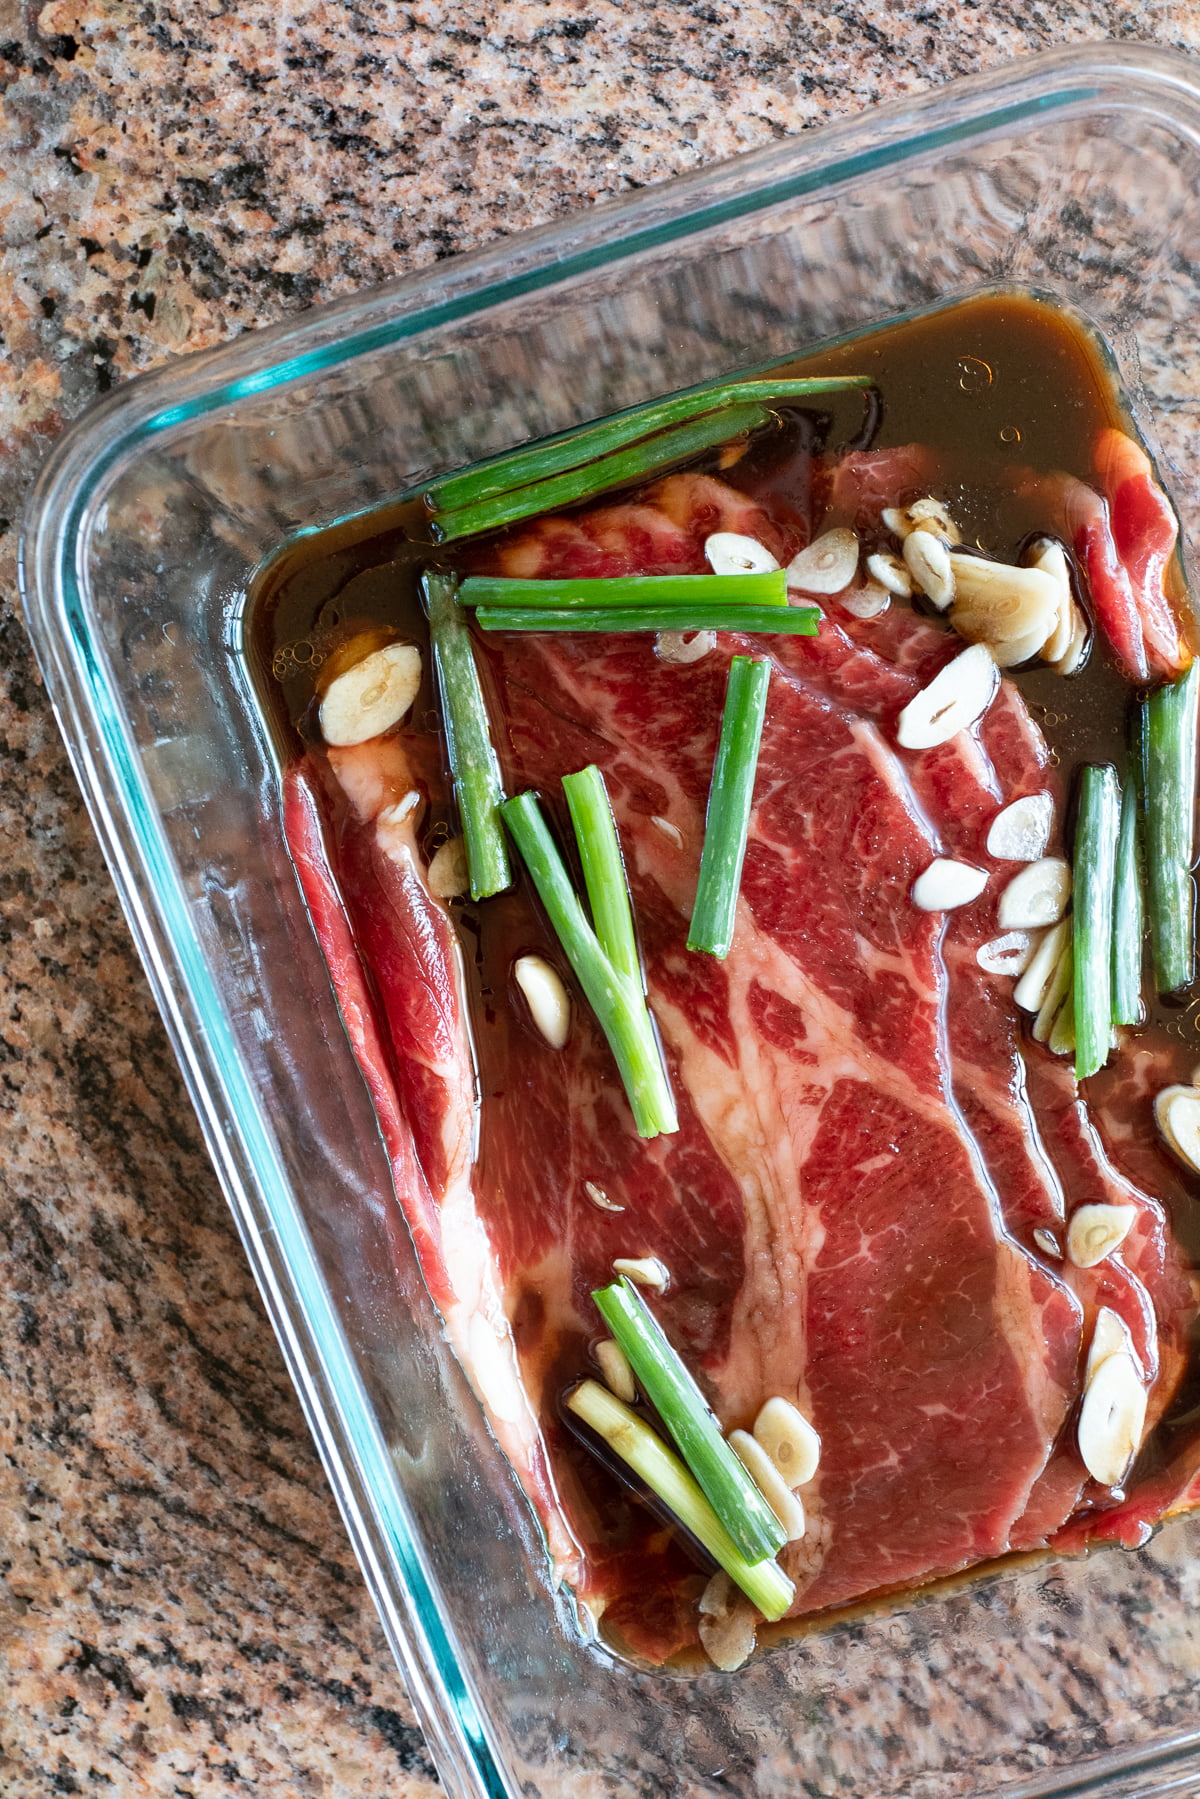 Marinating the rib eye slices in a mixture of soy sauce, sesame oil, sugar, garlic, and green onions.